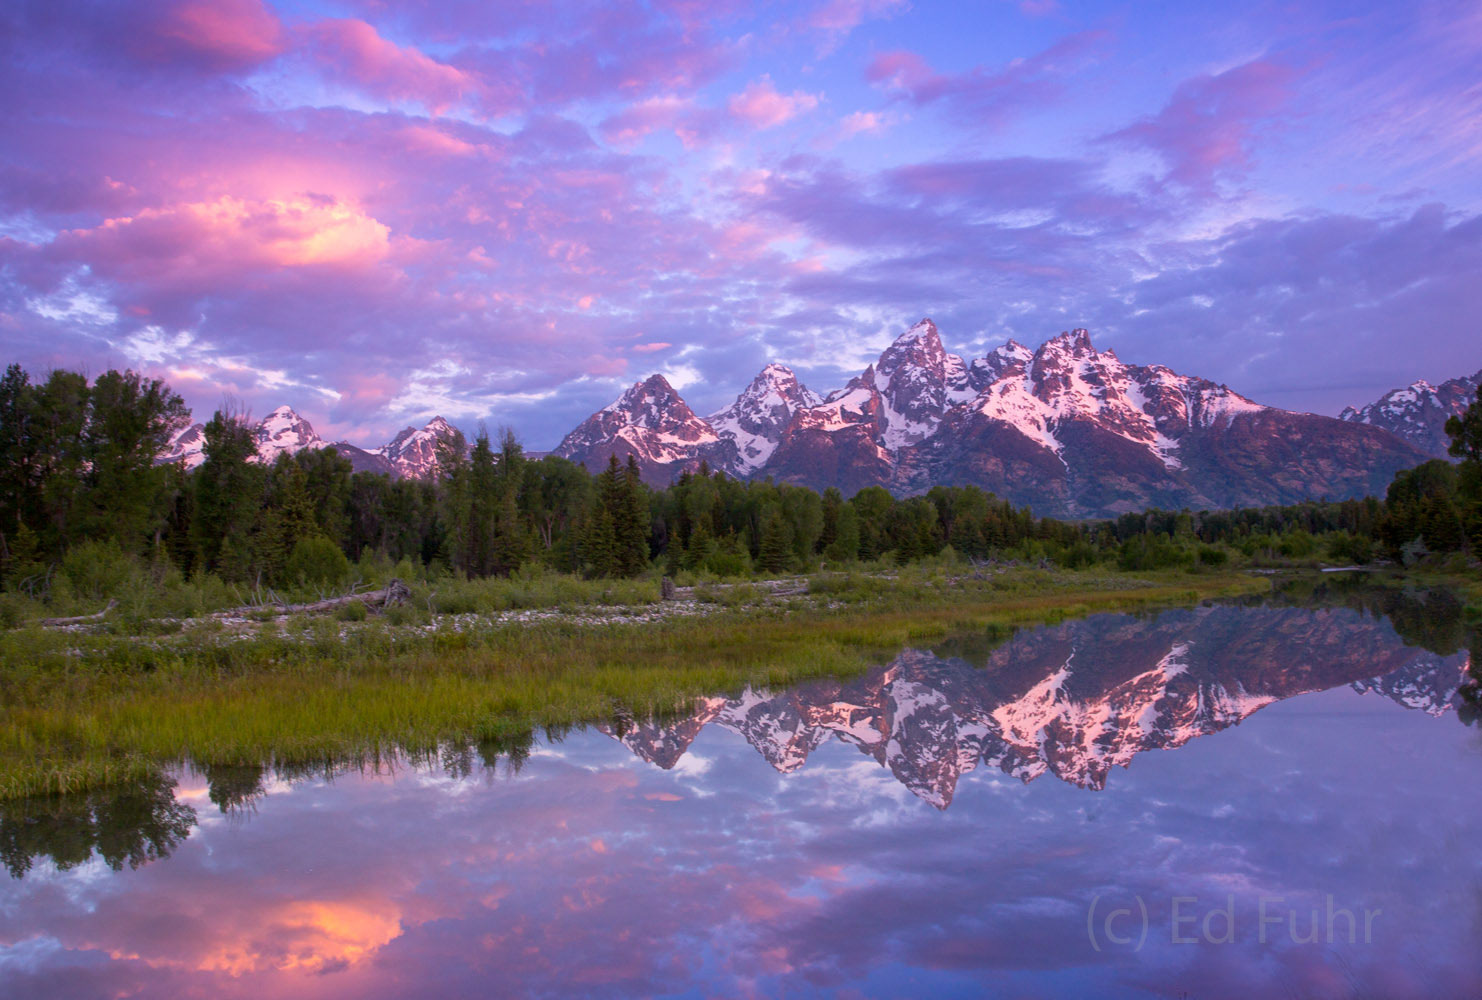 Early sunrise at the new beaver pond at Schwabacher's Landing.